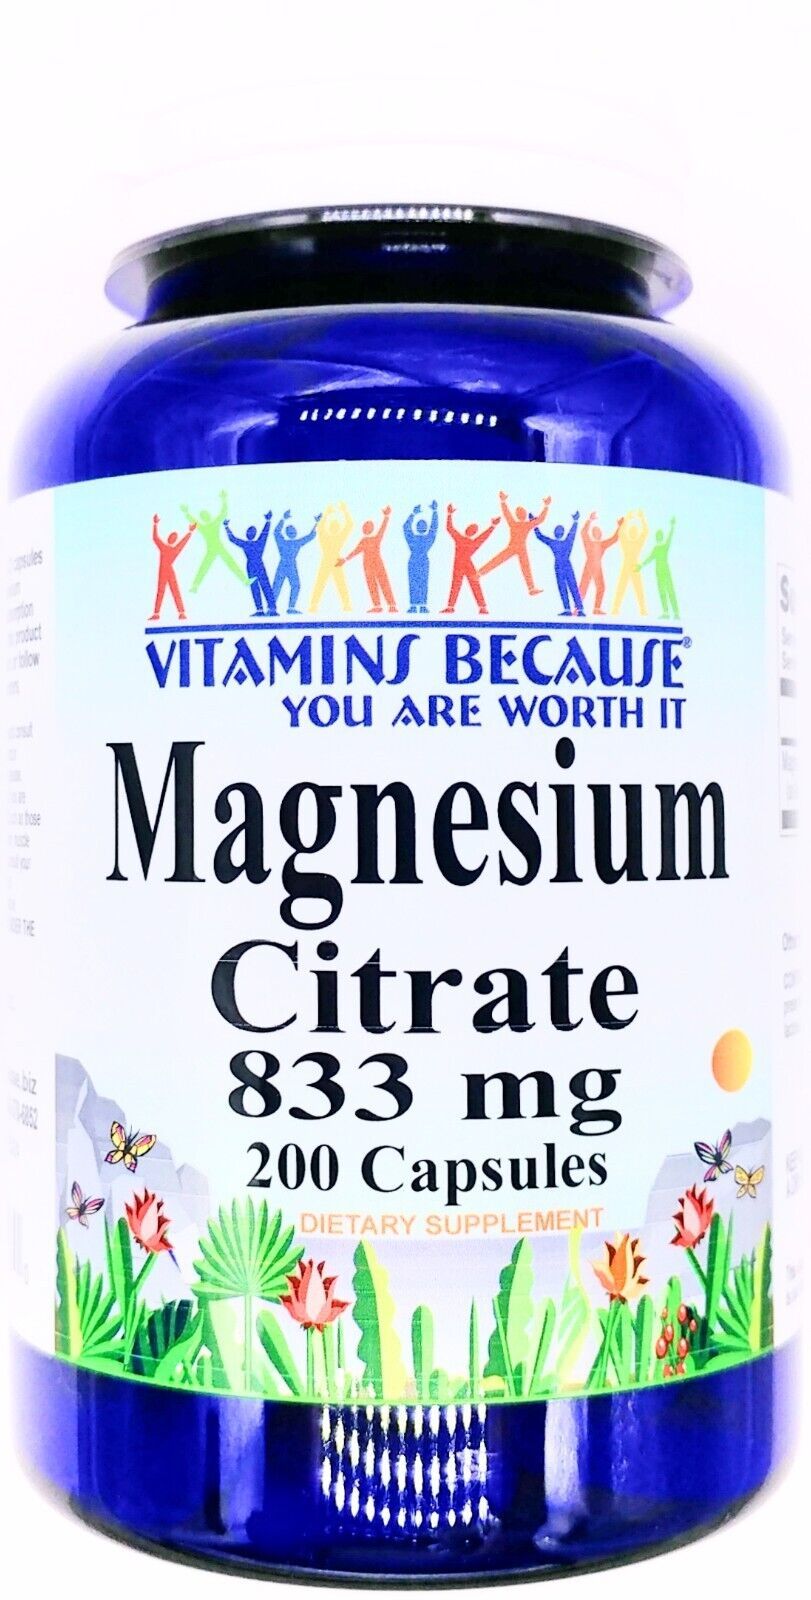 200 capsule magnesium citrate 833mg high potency extra strength pill